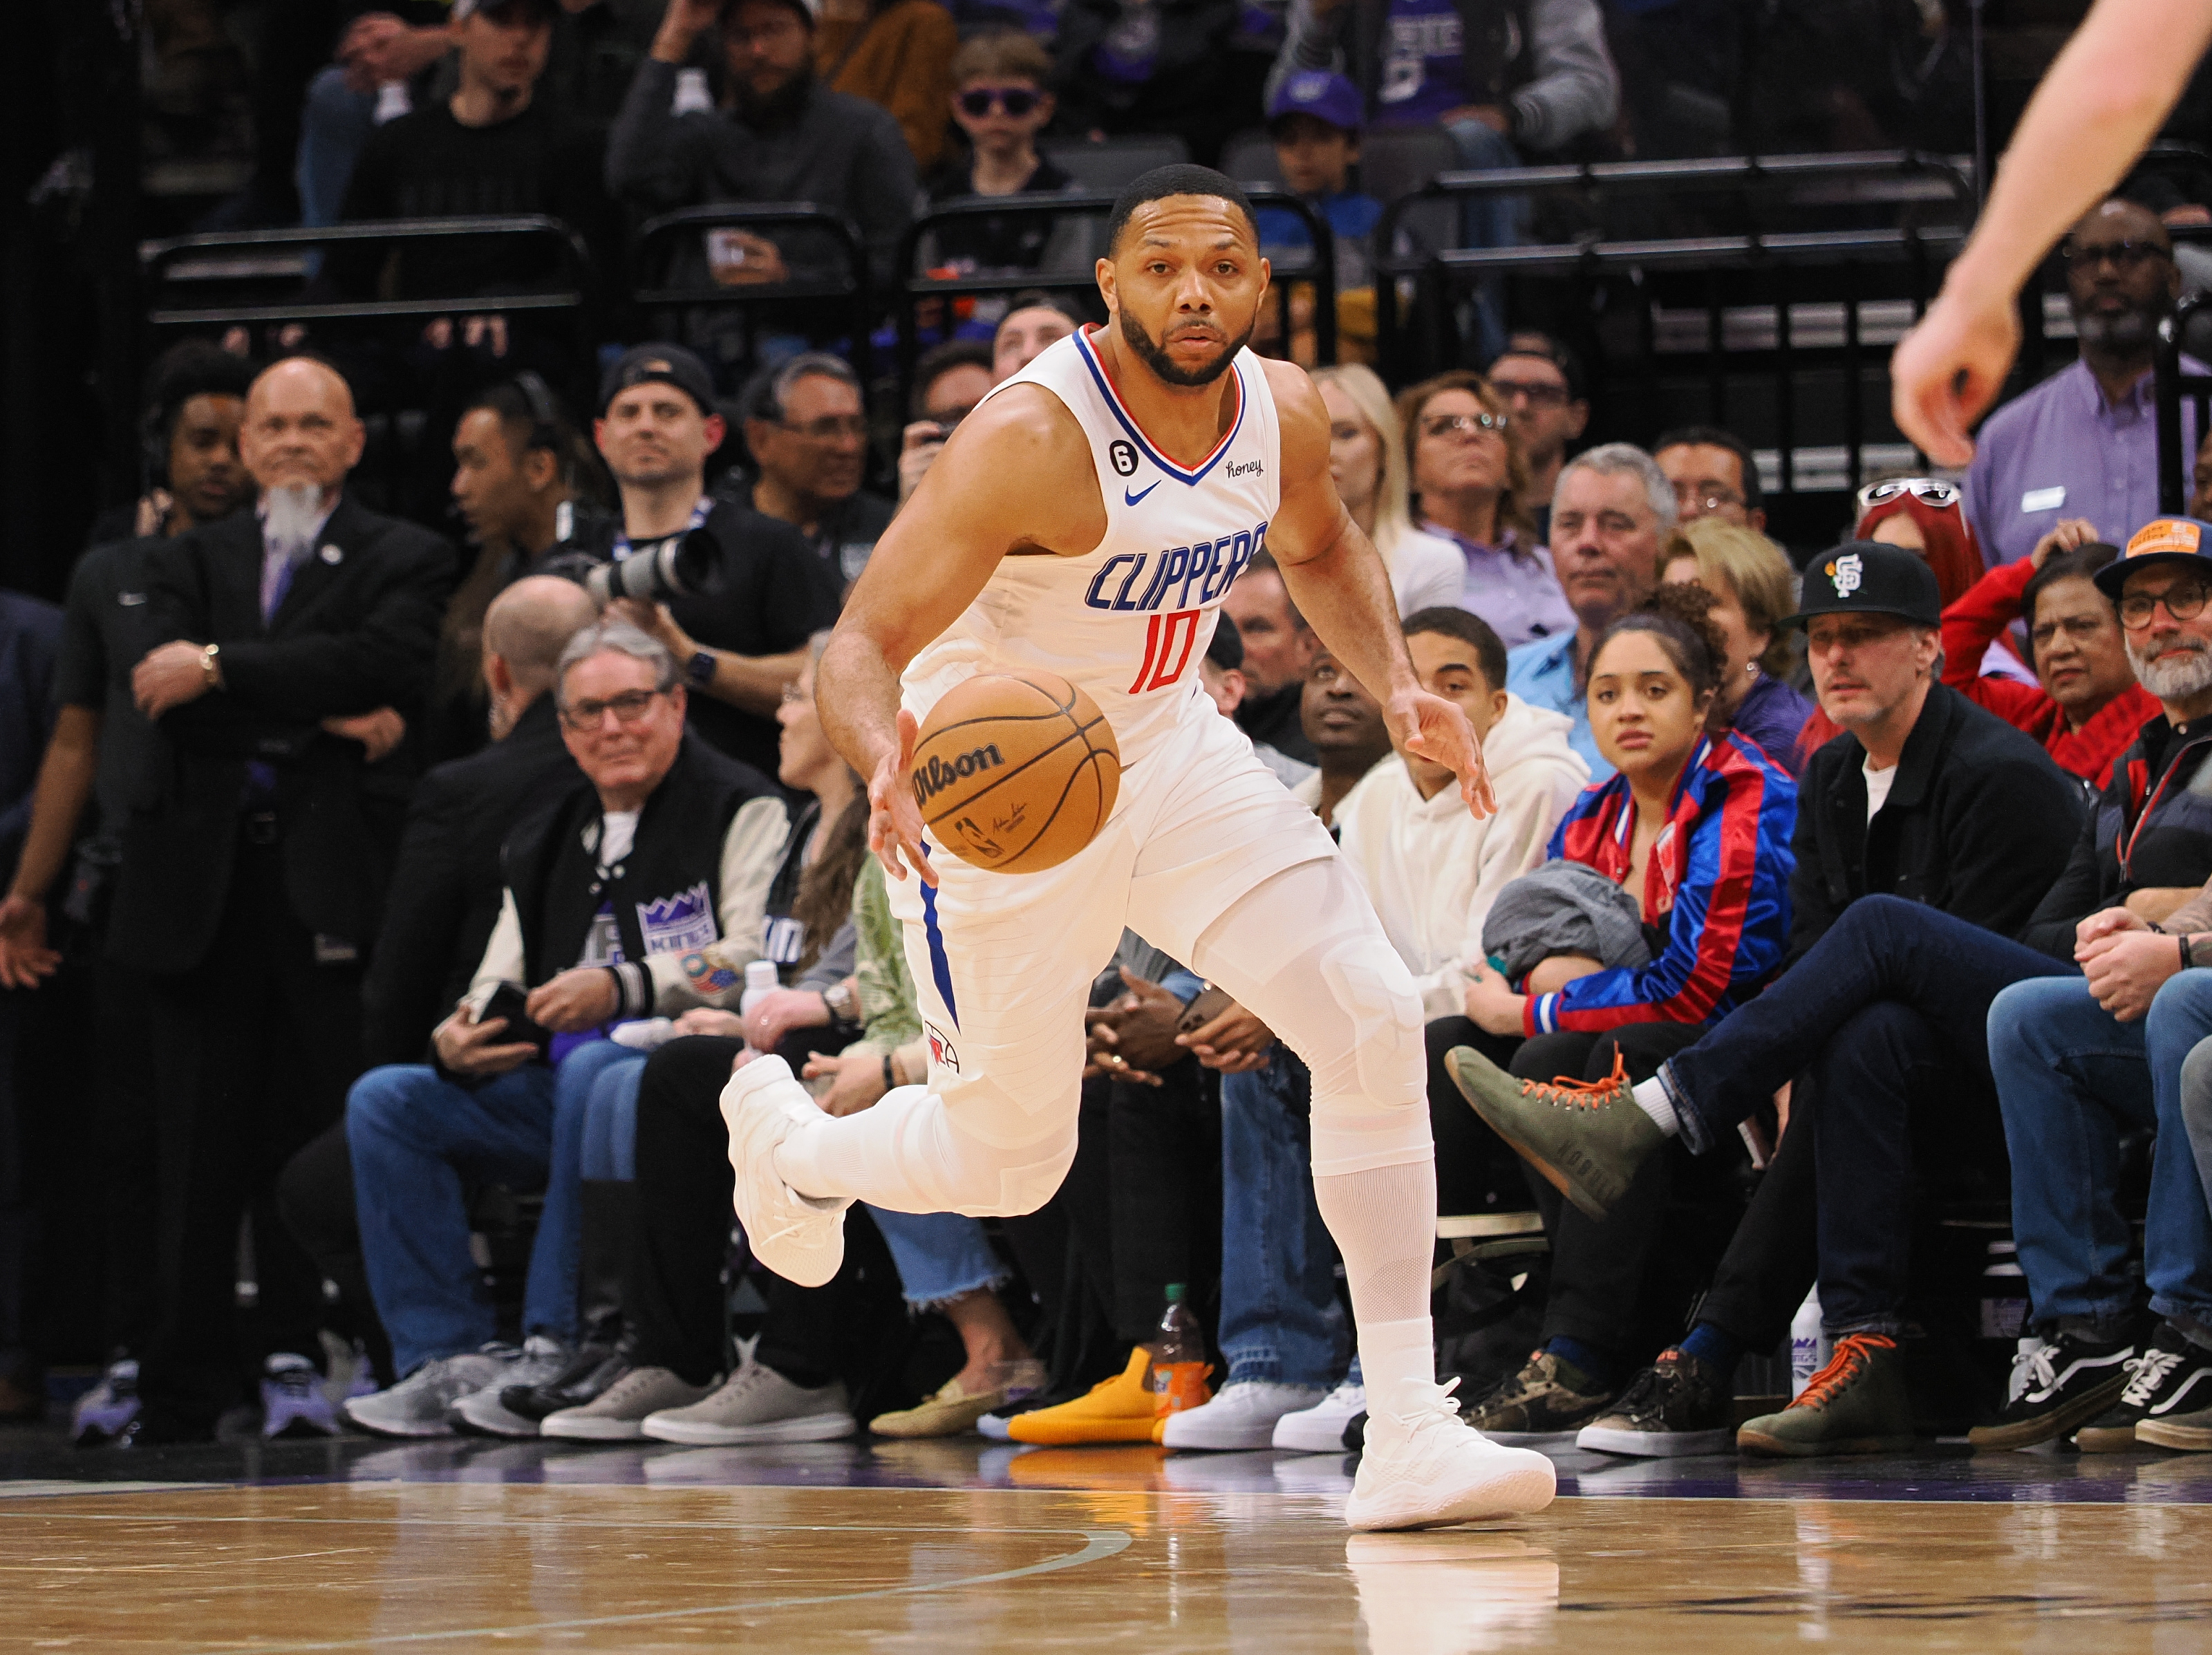 Eric Gordon has become a key rotational piece for the LA Clippers